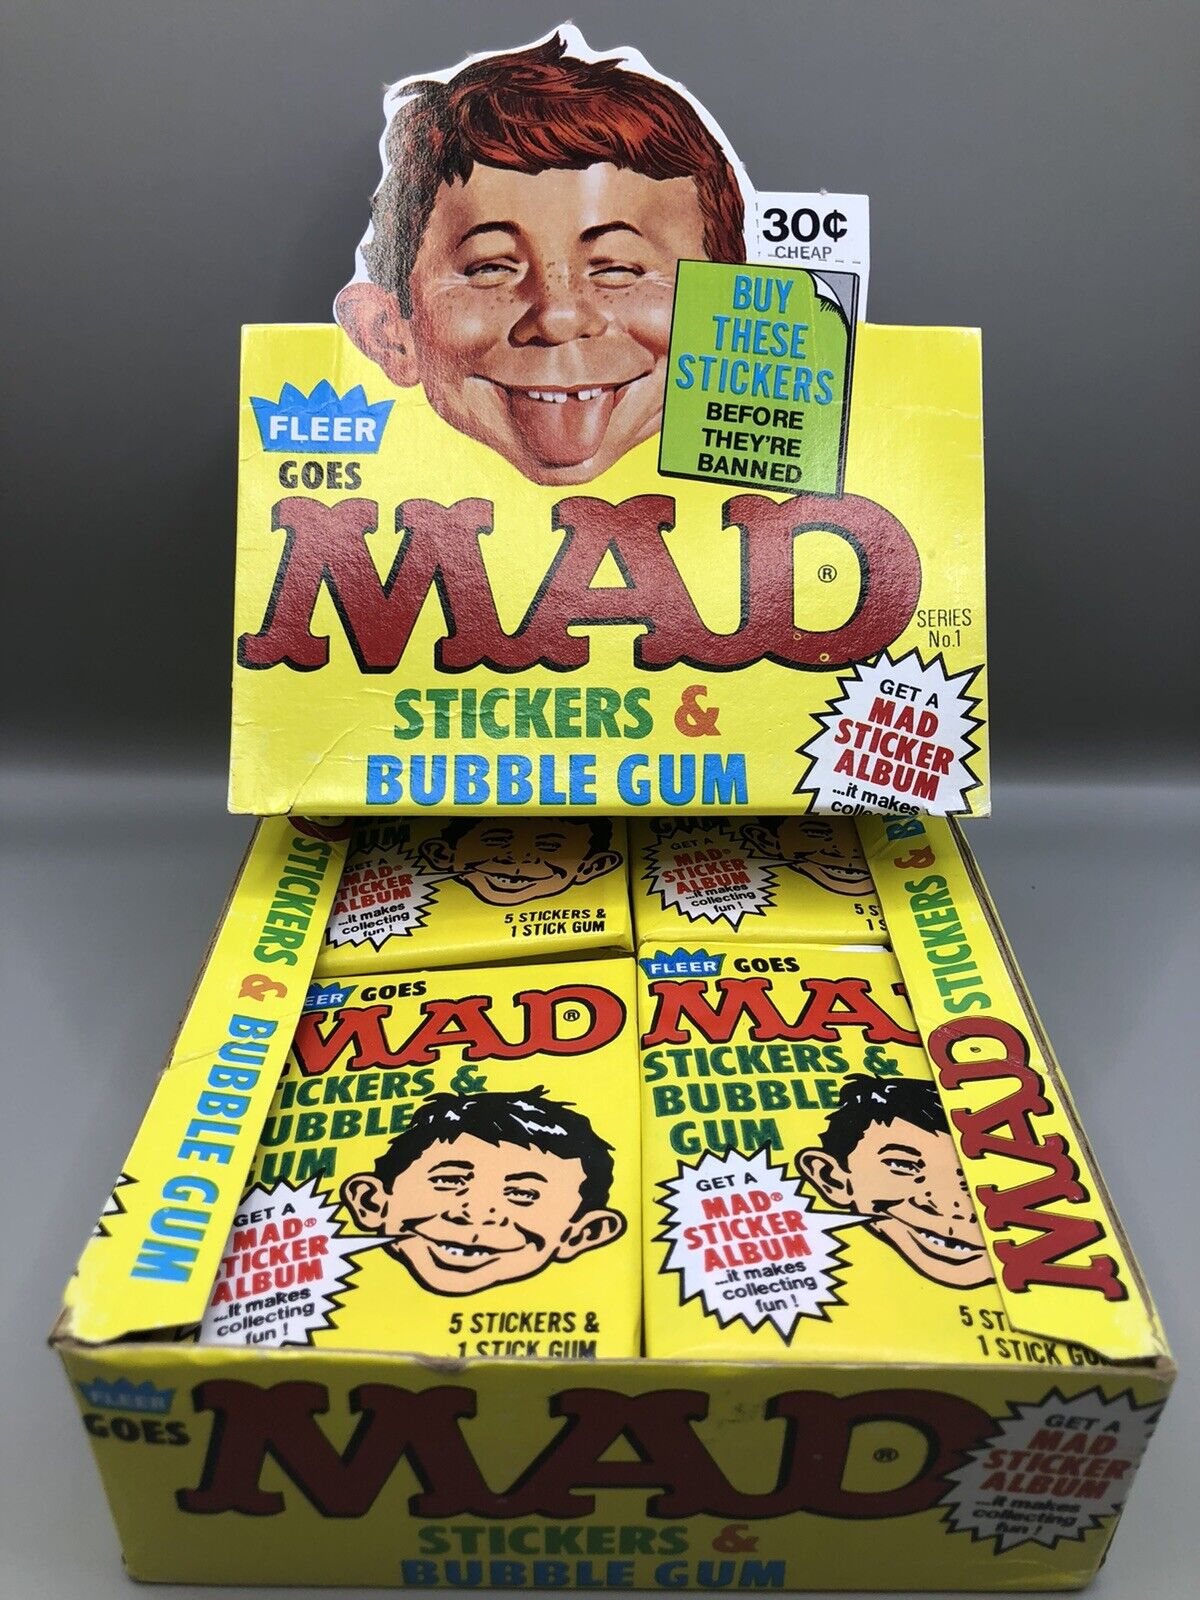 1983 Fleer Goes MAD STICKERS (1) Unopened Wax Pack. (1) Pack. Vintage Authentic